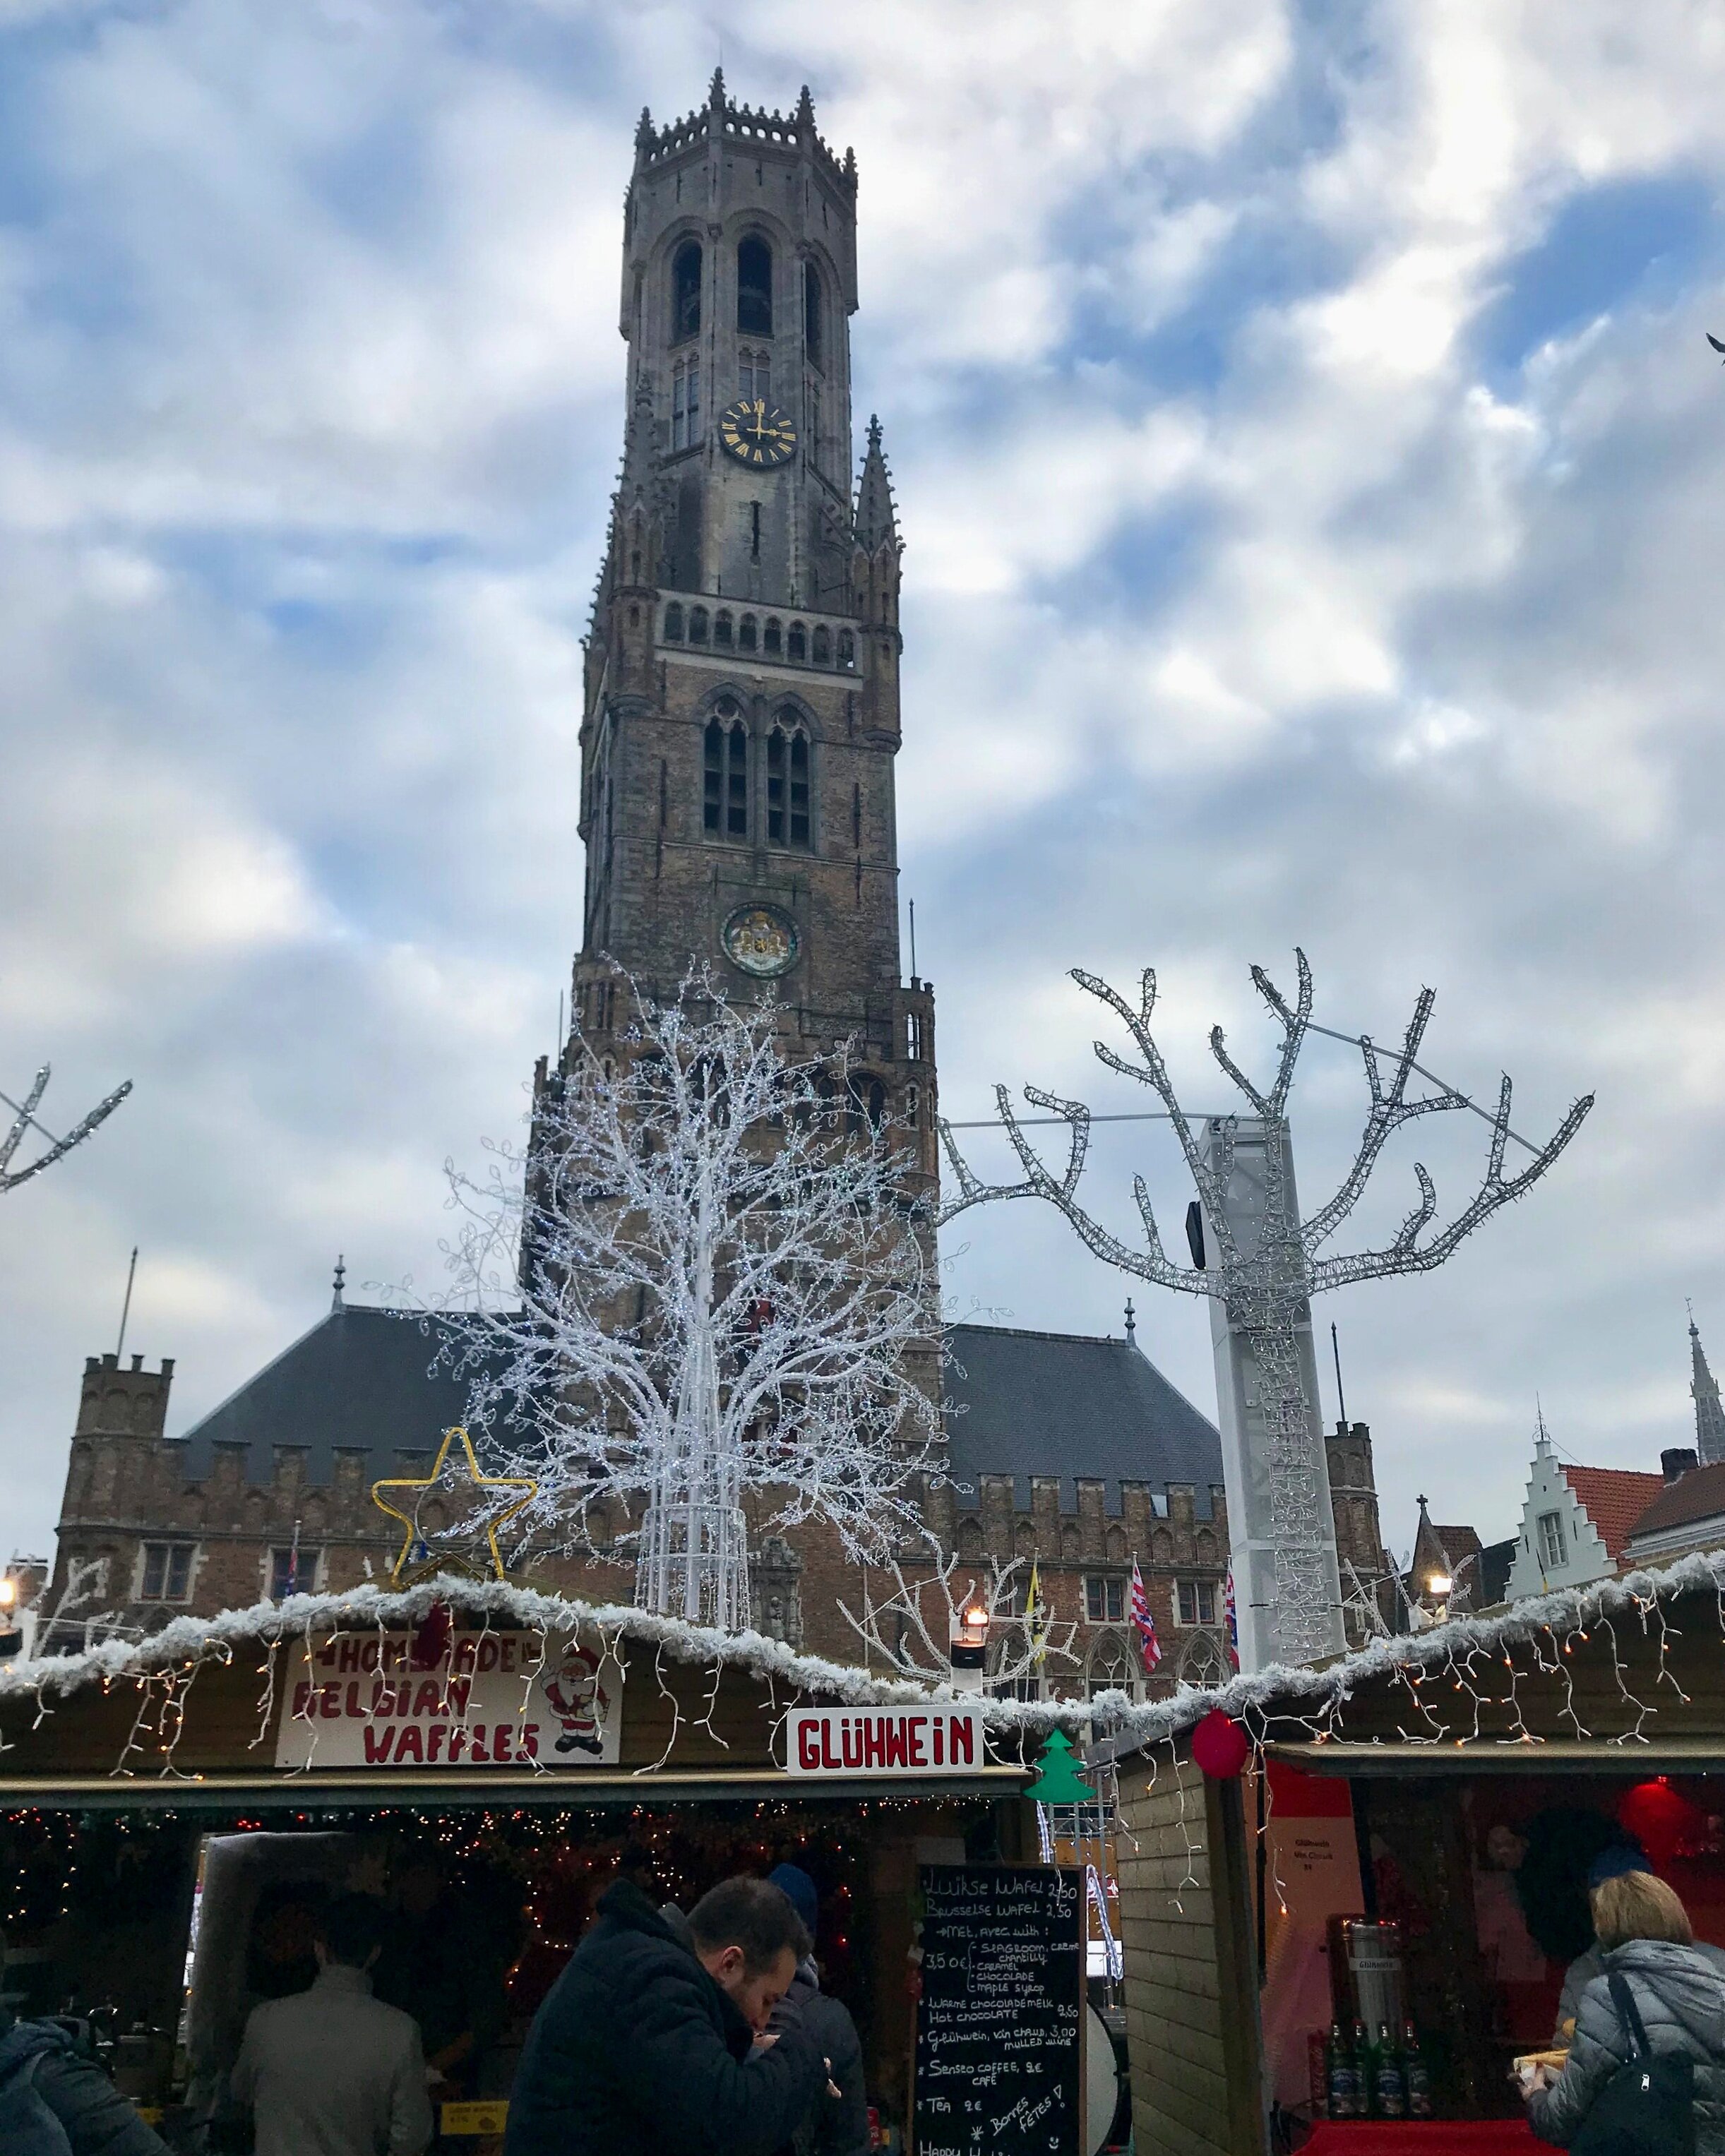 The Belfry of Brugges towers over the Christmas market in Brugges.